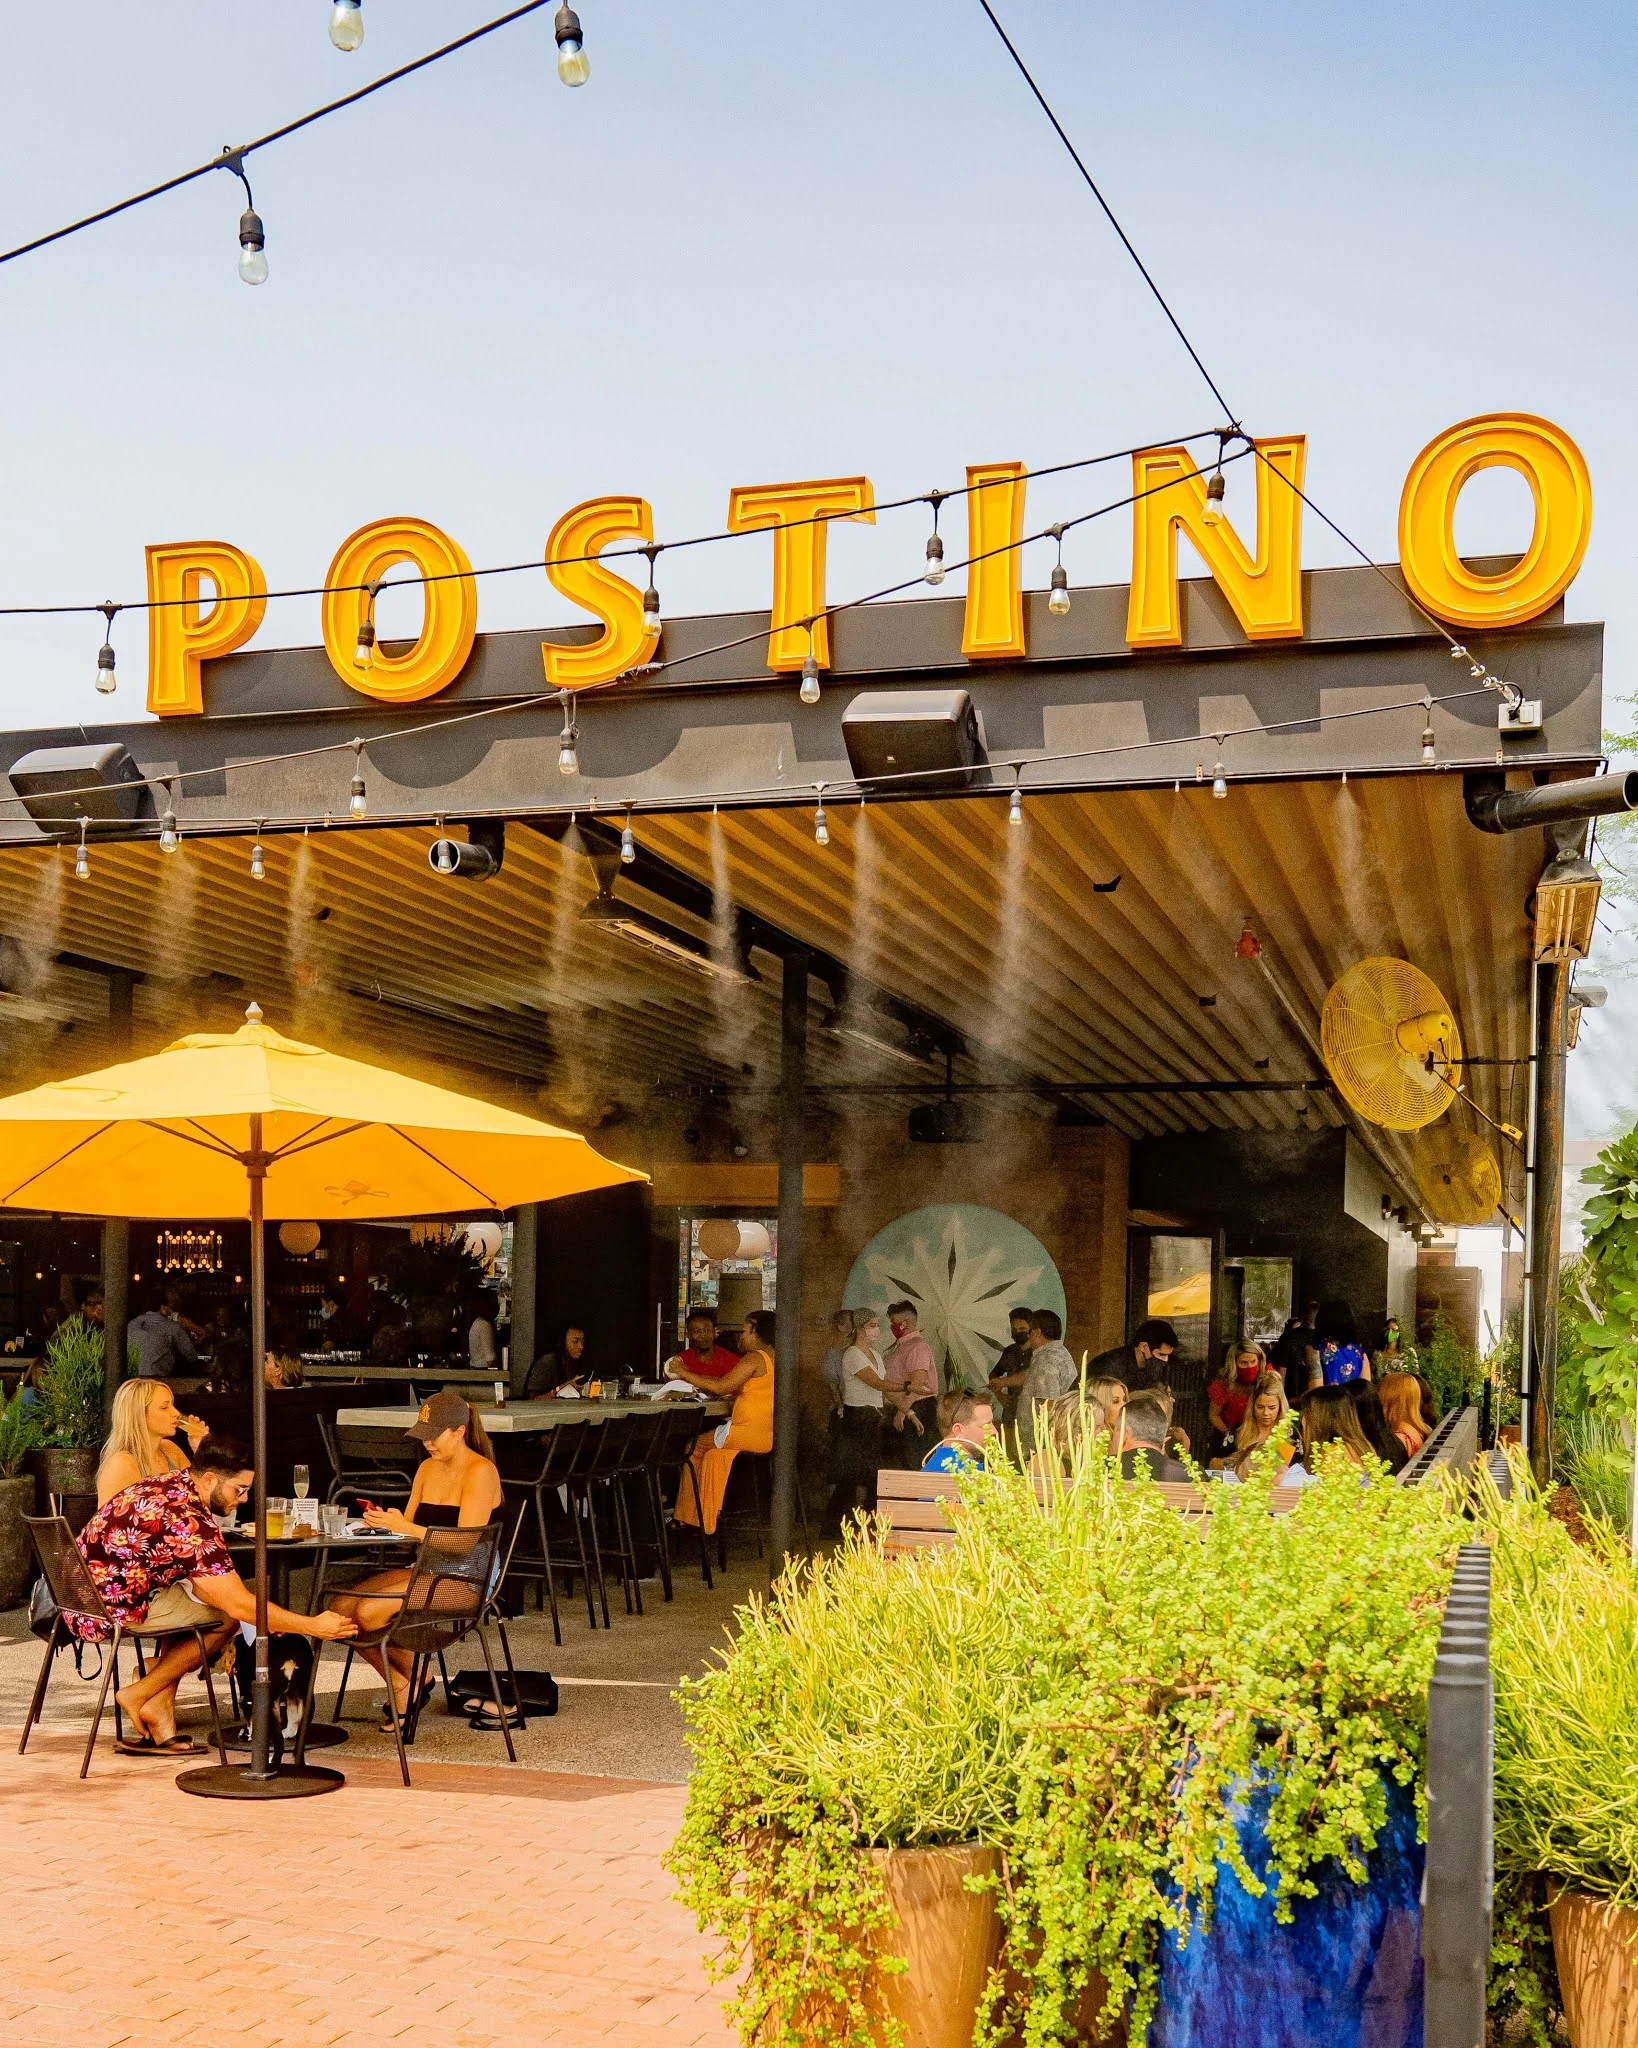 A large yellow sign that says Postino.